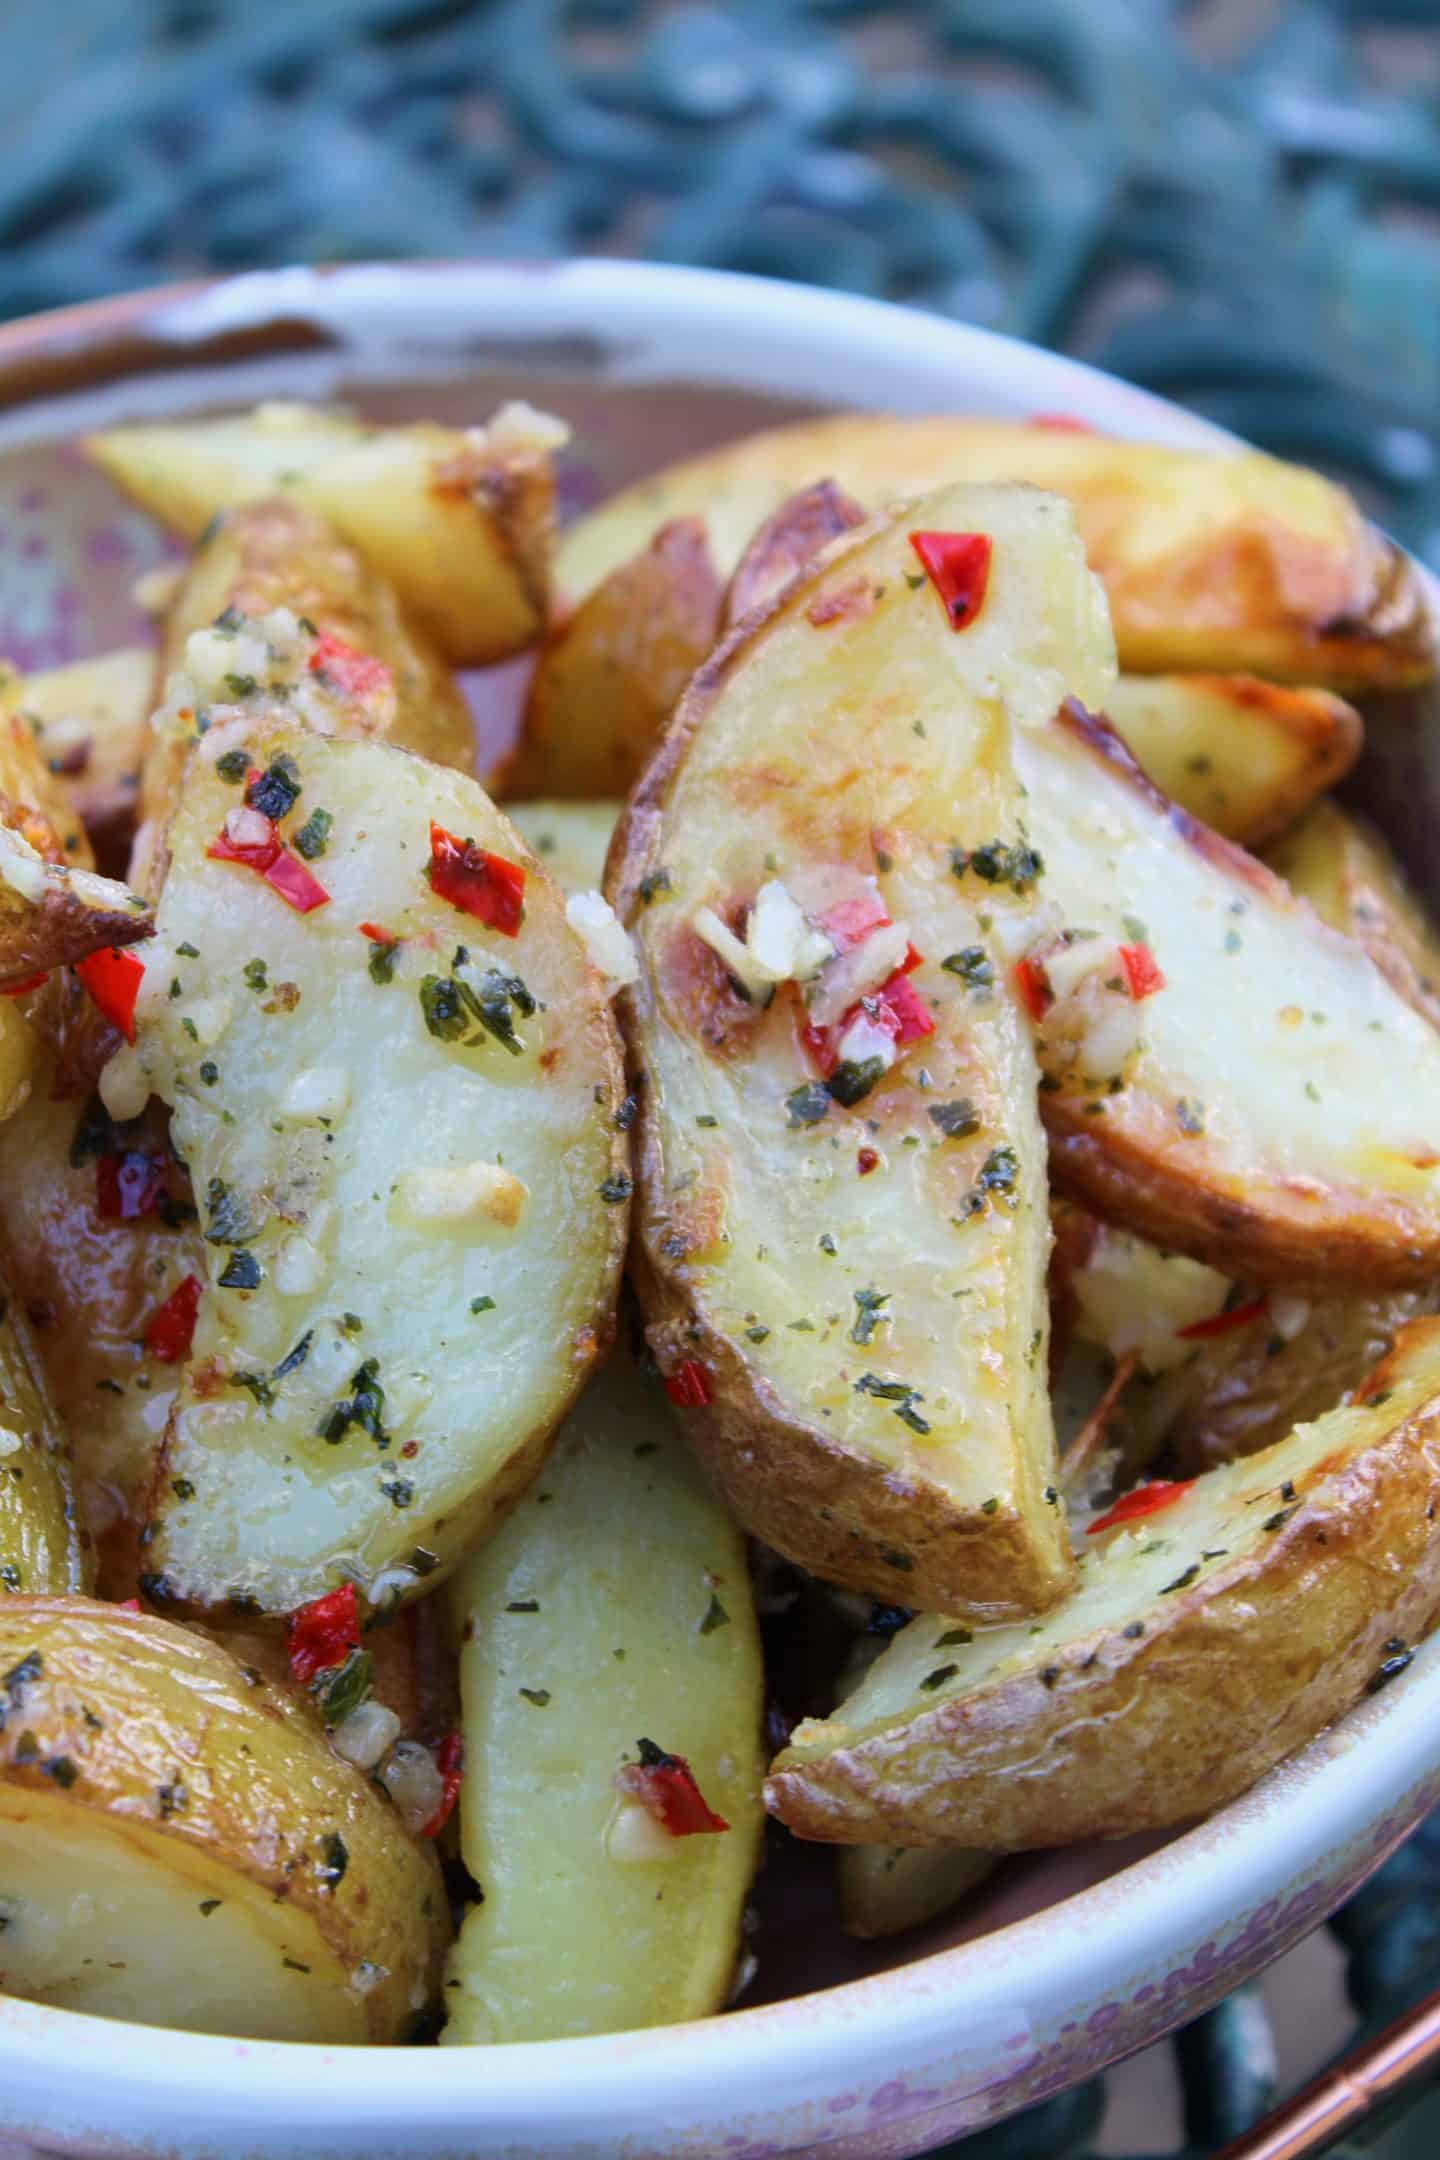 Gluten free potato wedges with garlic and chilli